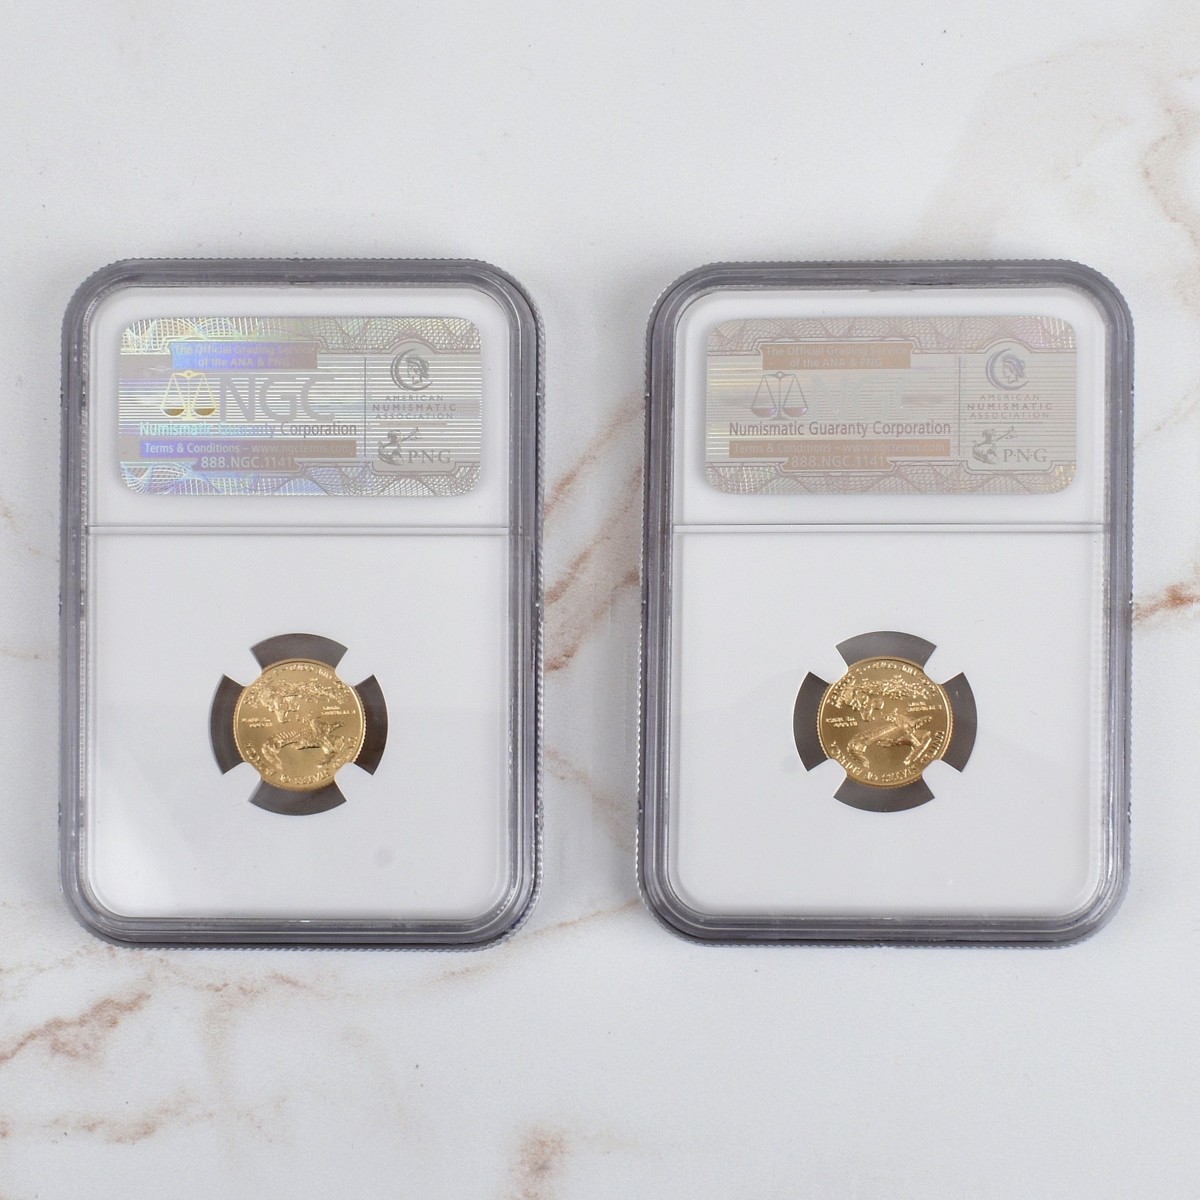 Two 2009 US $5 Gold Eagle Early Release